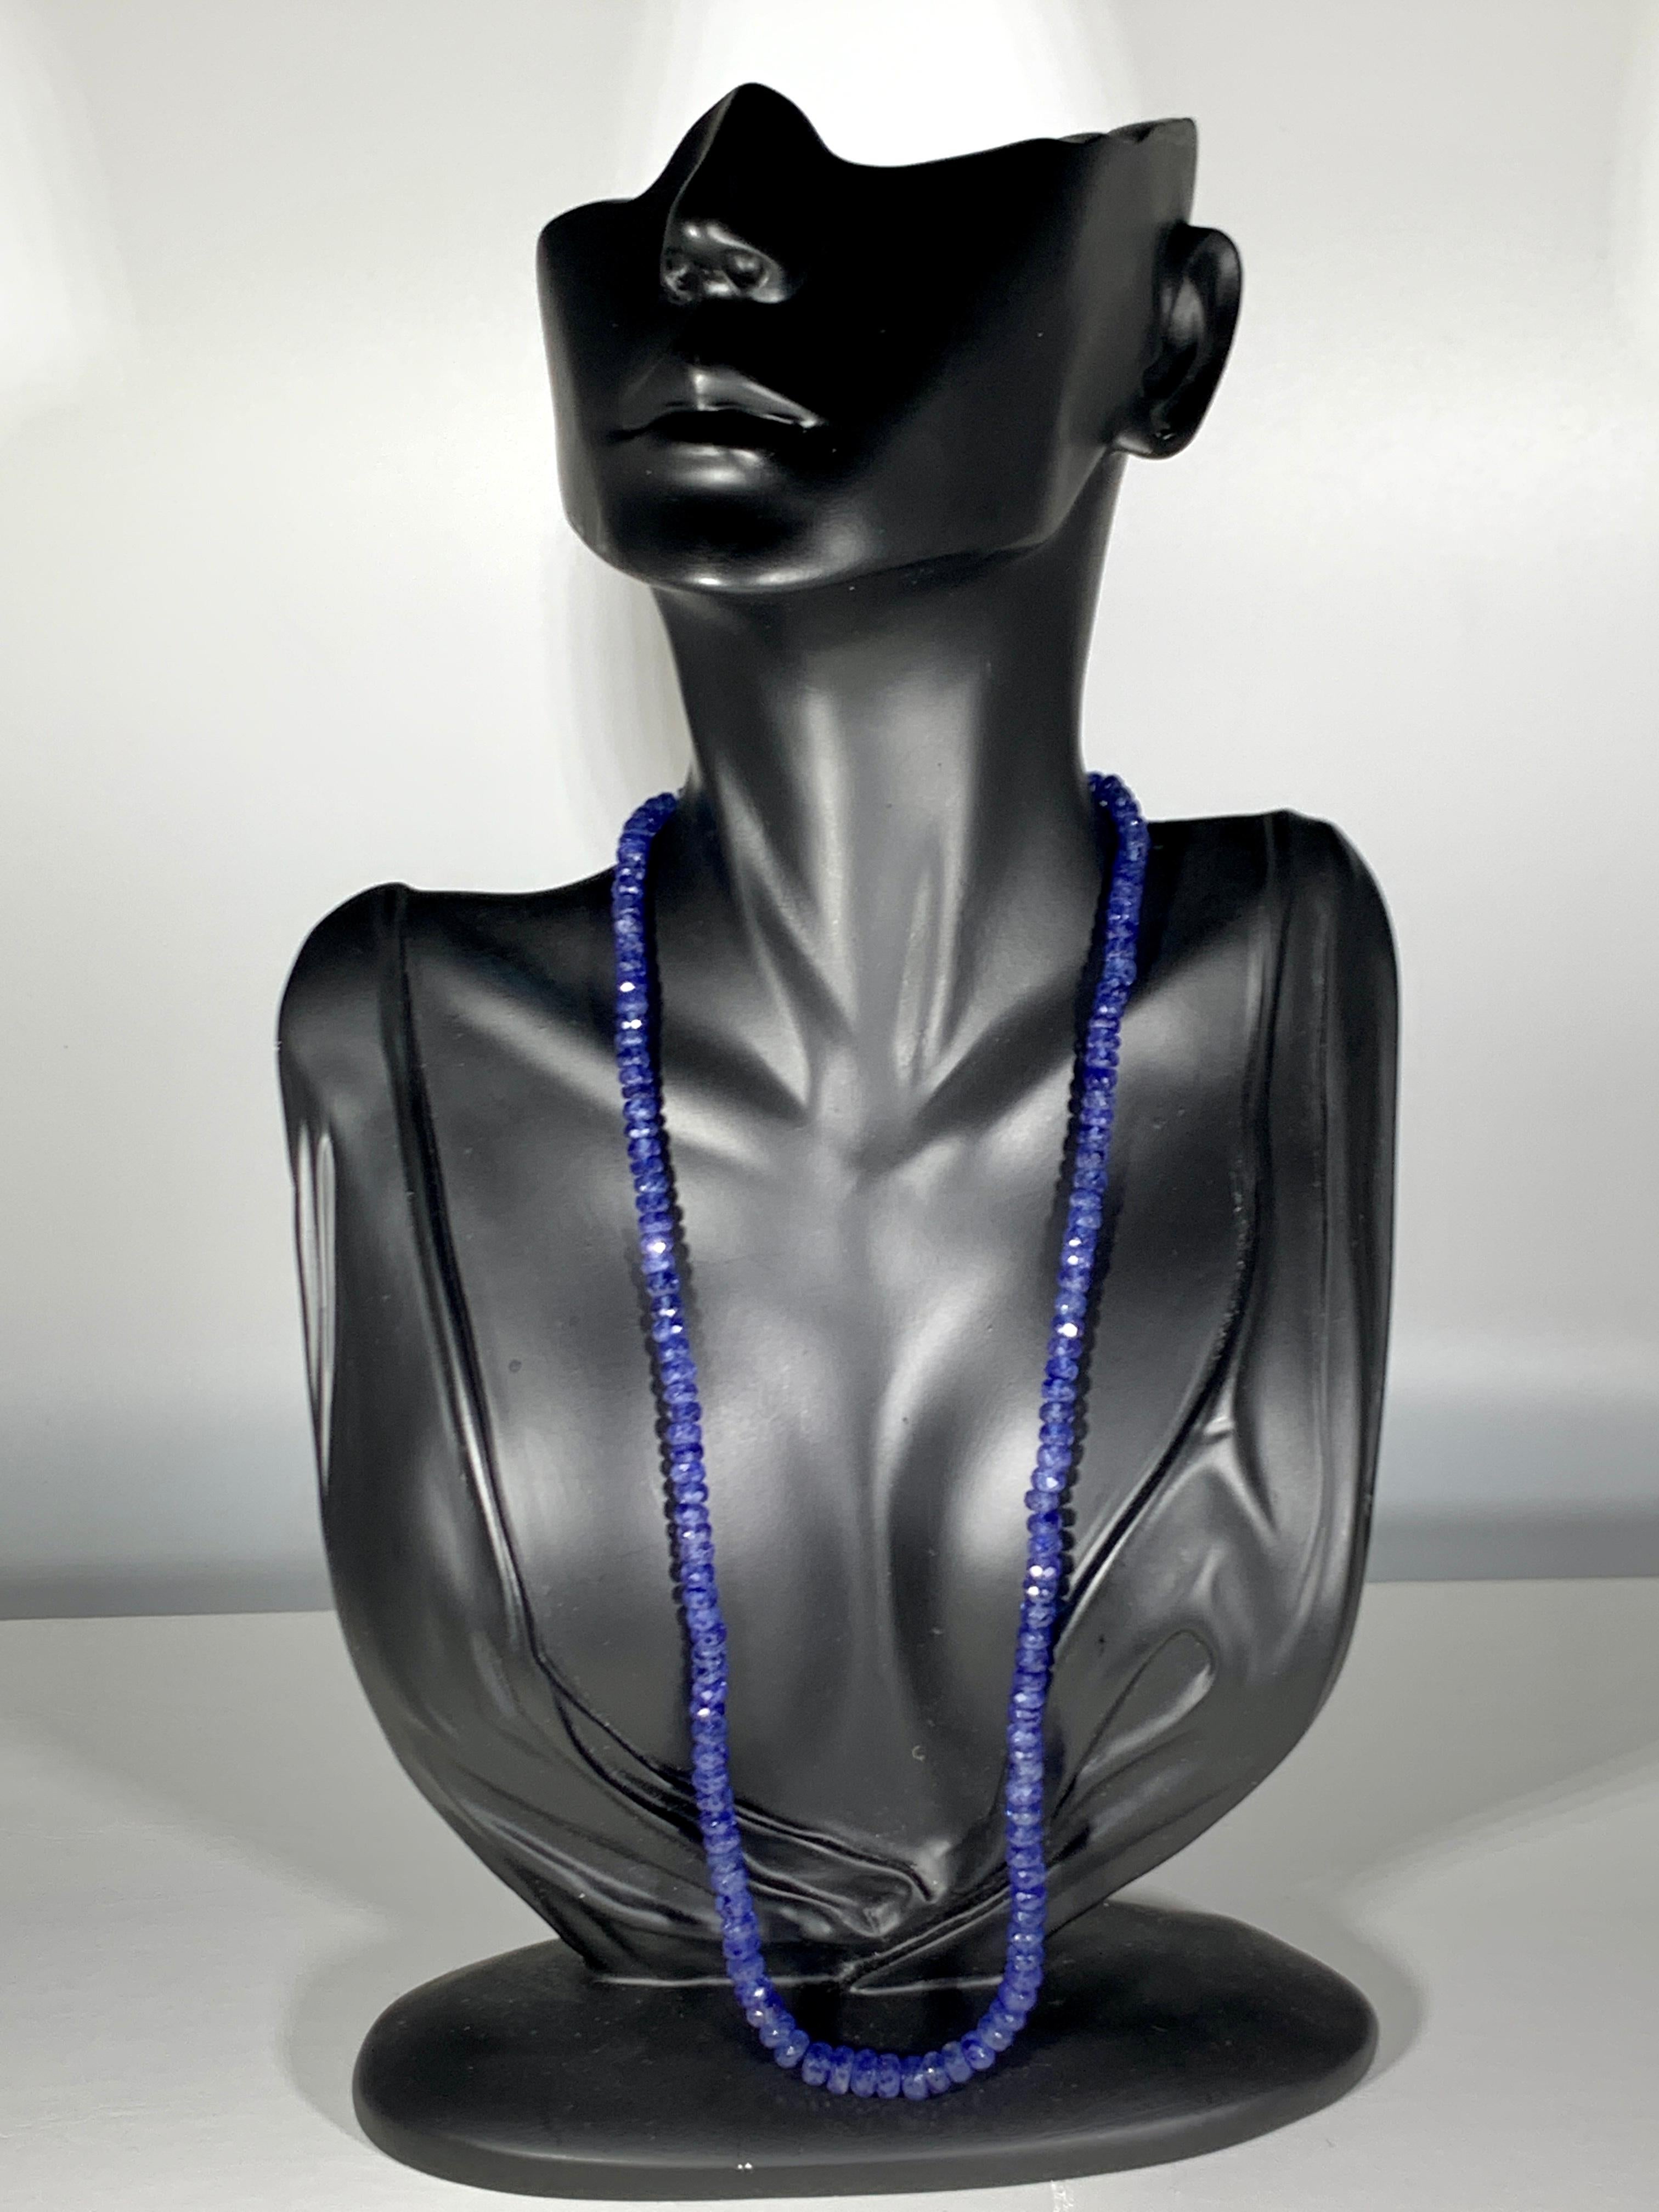 Natural  approximately  160  Ct Natural Tanzanite Bead Single Strand Necklace 14 Karat  white Gold clasp
All natural beads , no color enhancement
19